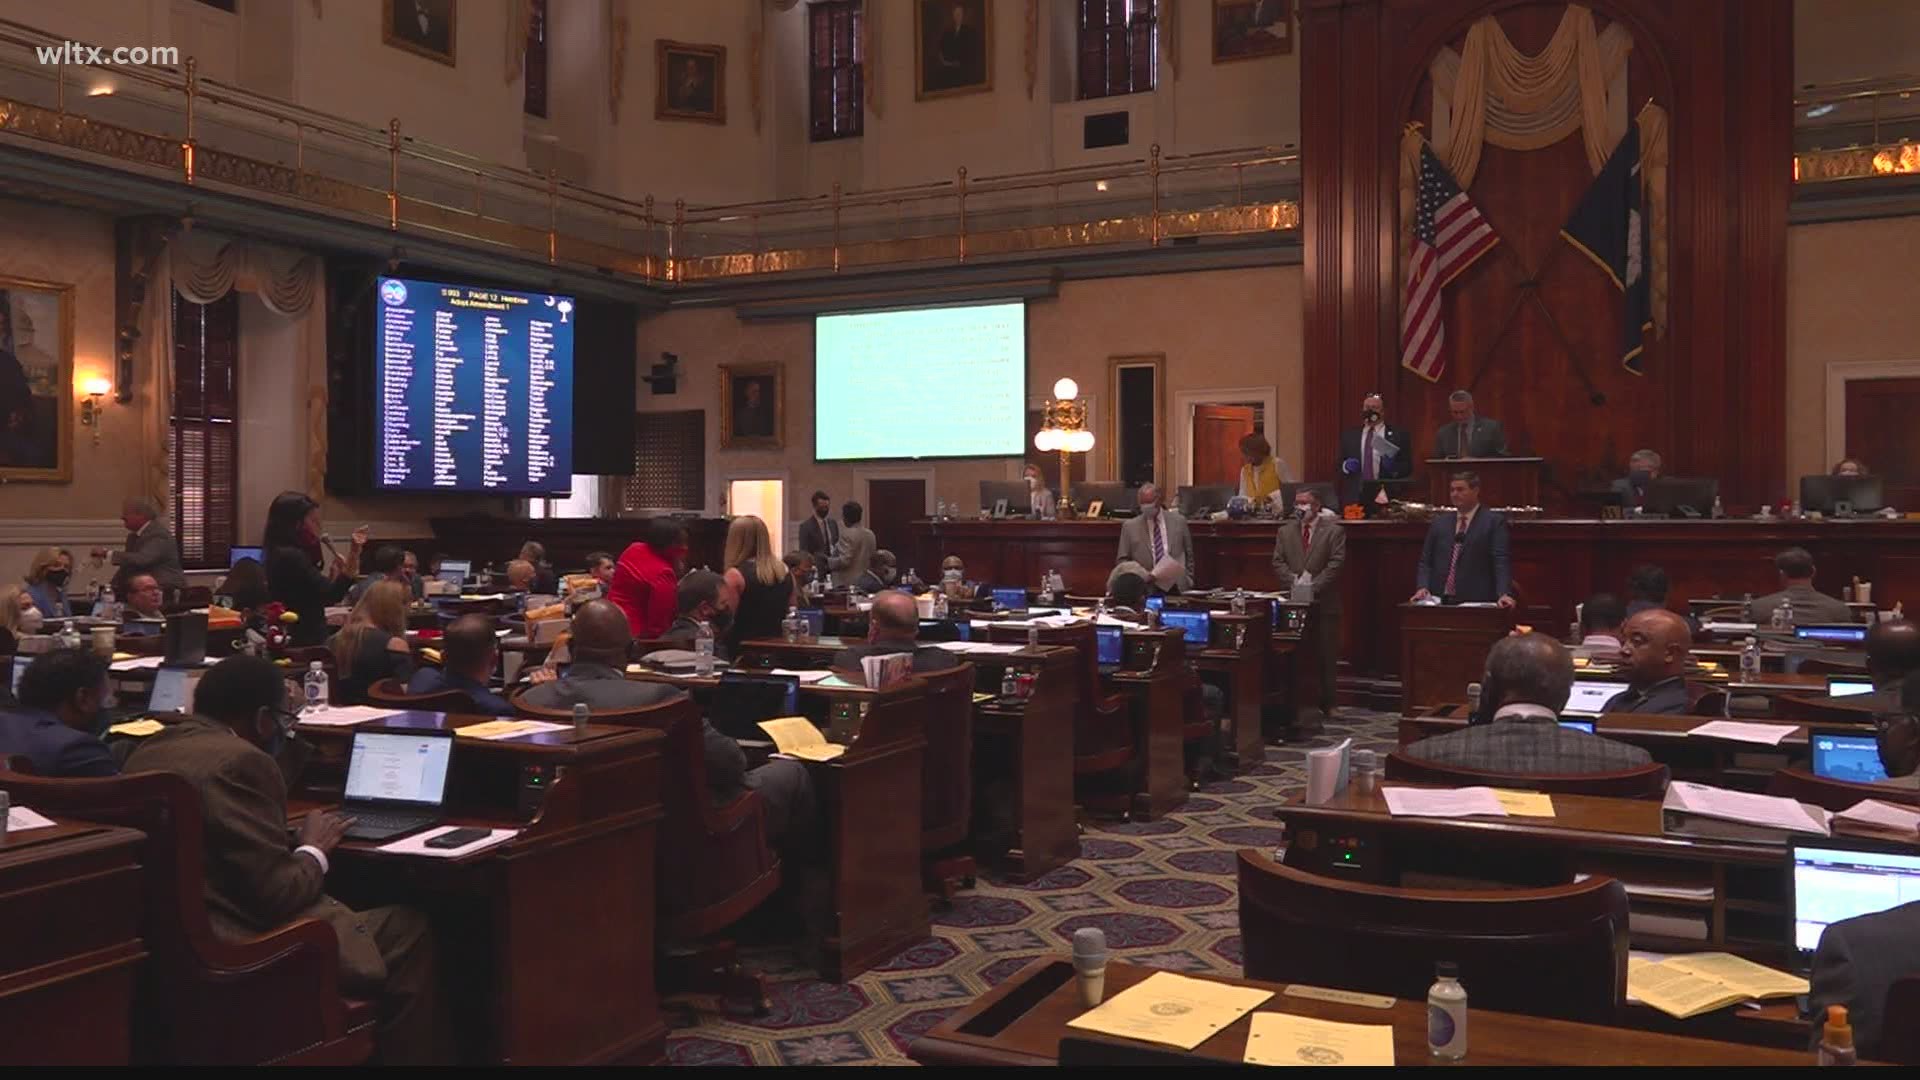 The S.C. General Assembly continued their special session on Tuesday debating how to spend hundreds of millions of dollars in the state budget and CARES Act funding.